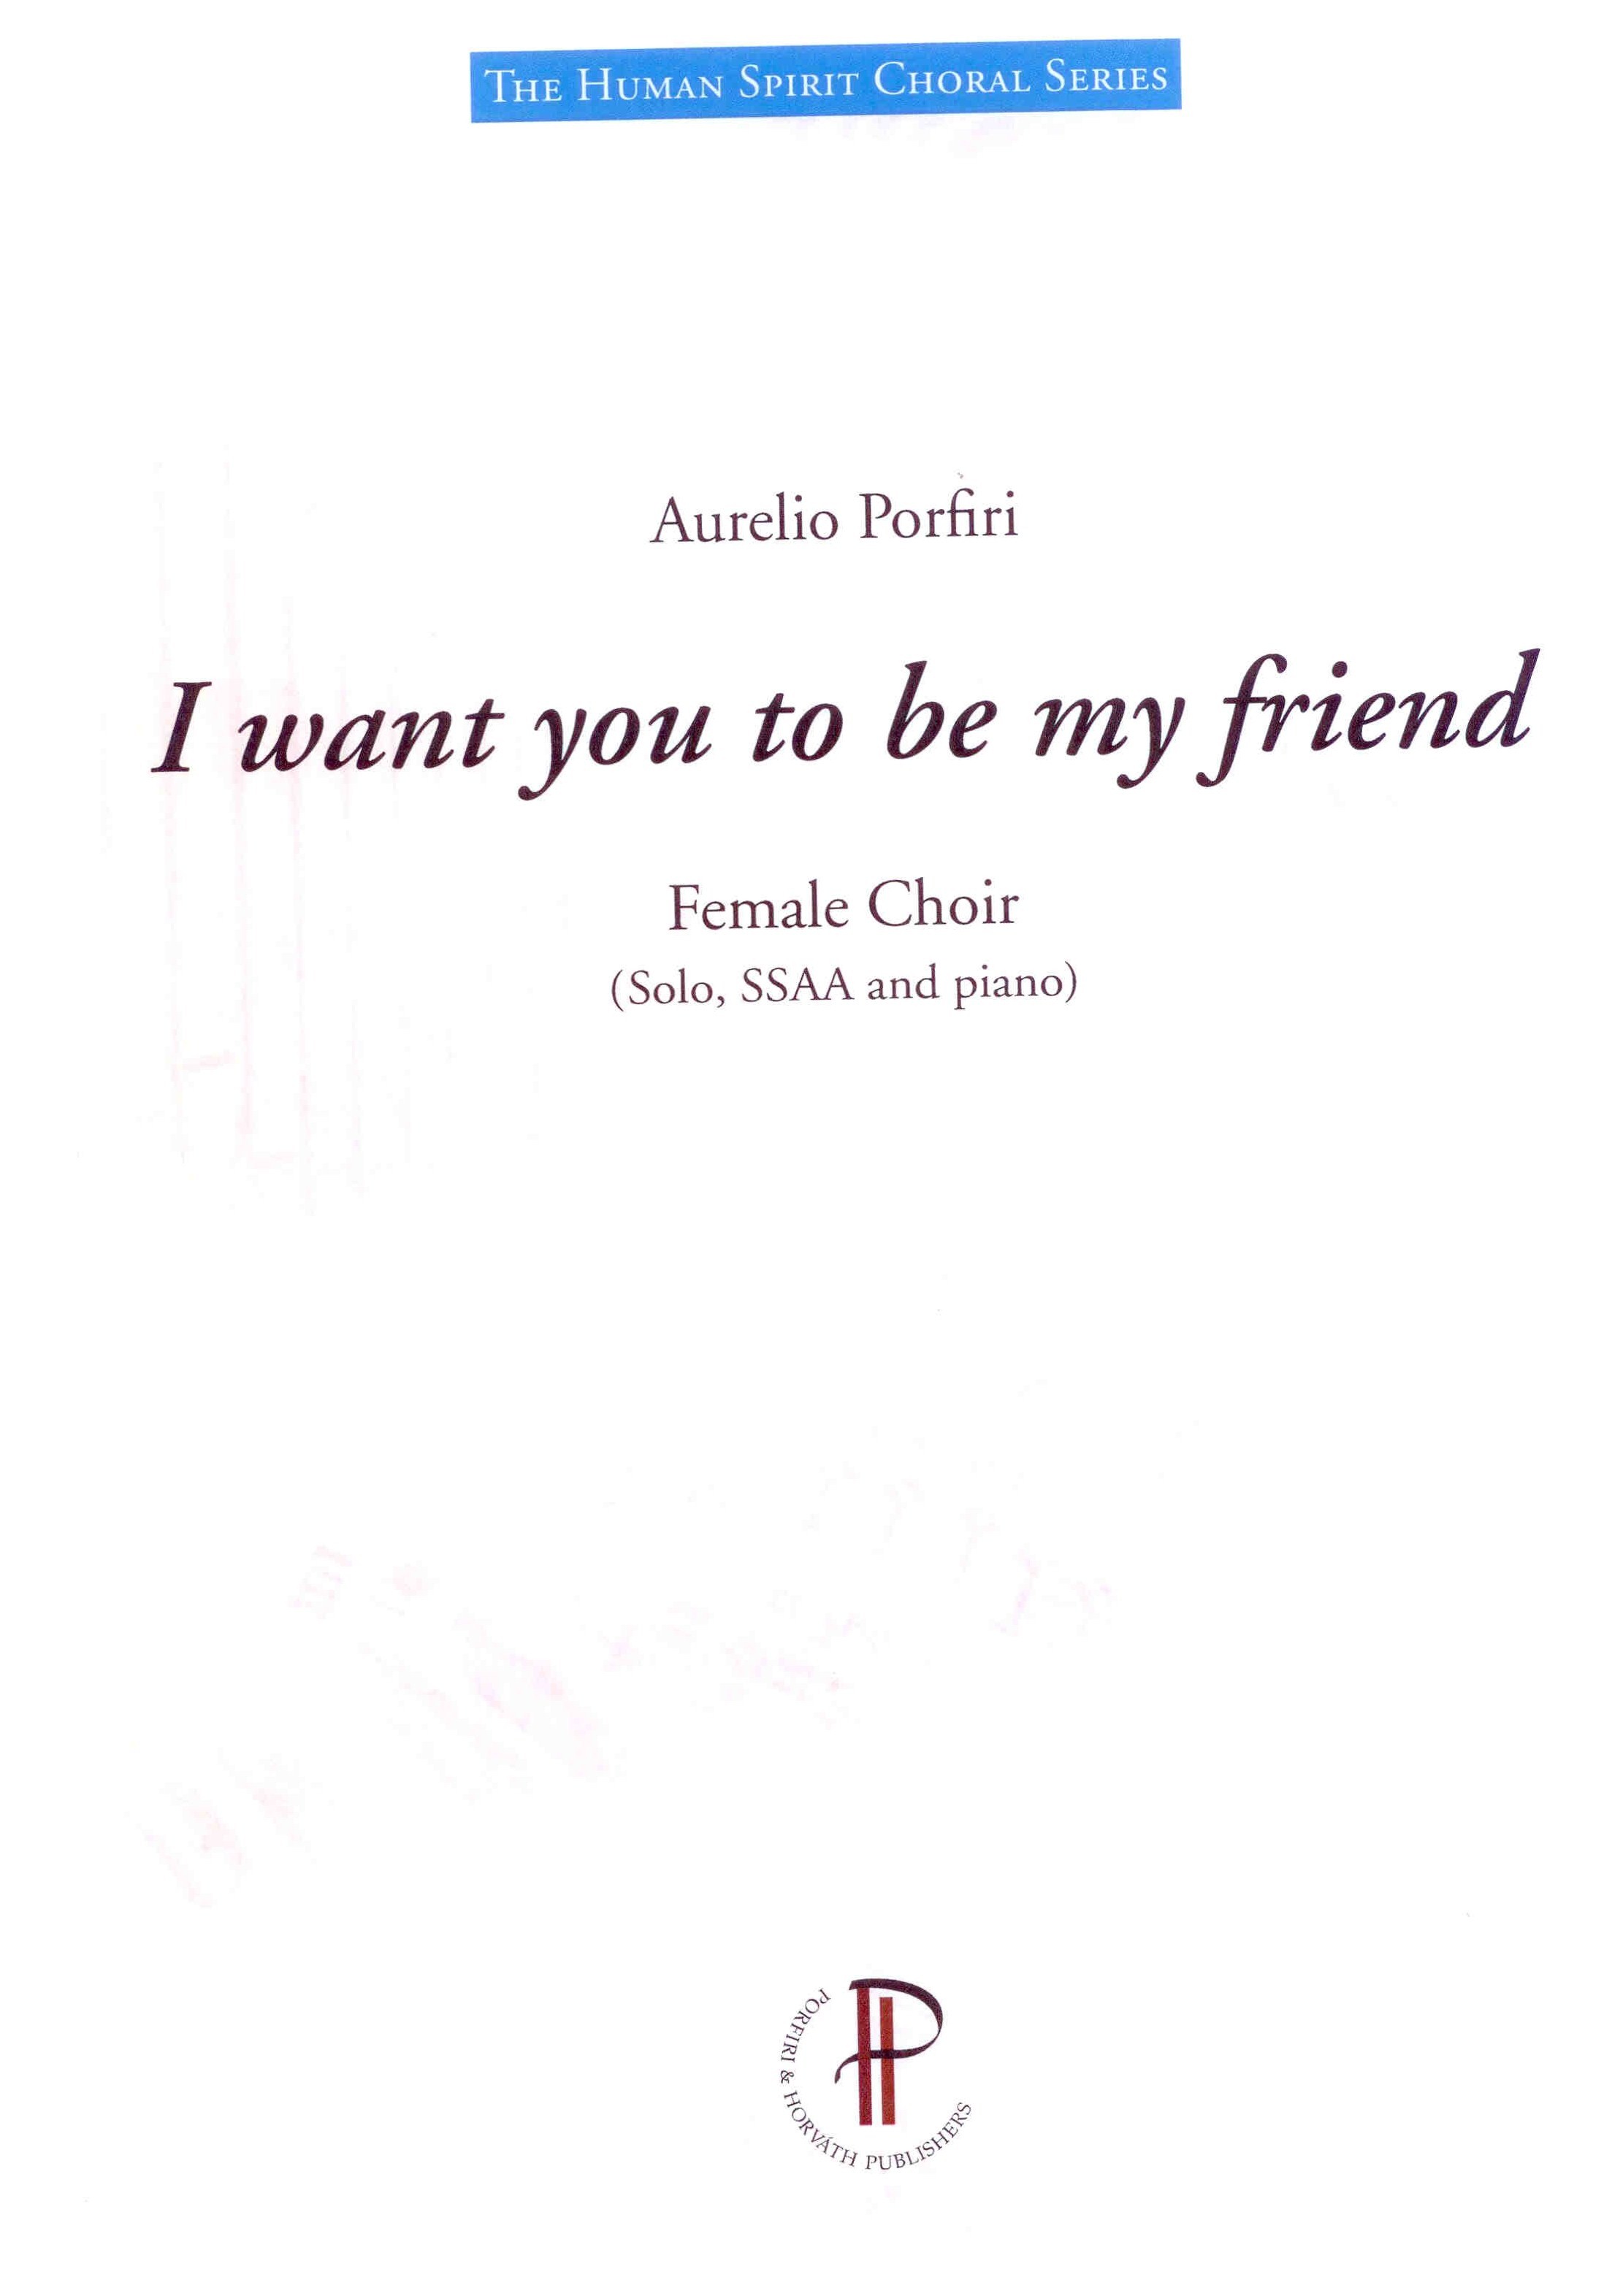 I want you to be my friend - Show sample score